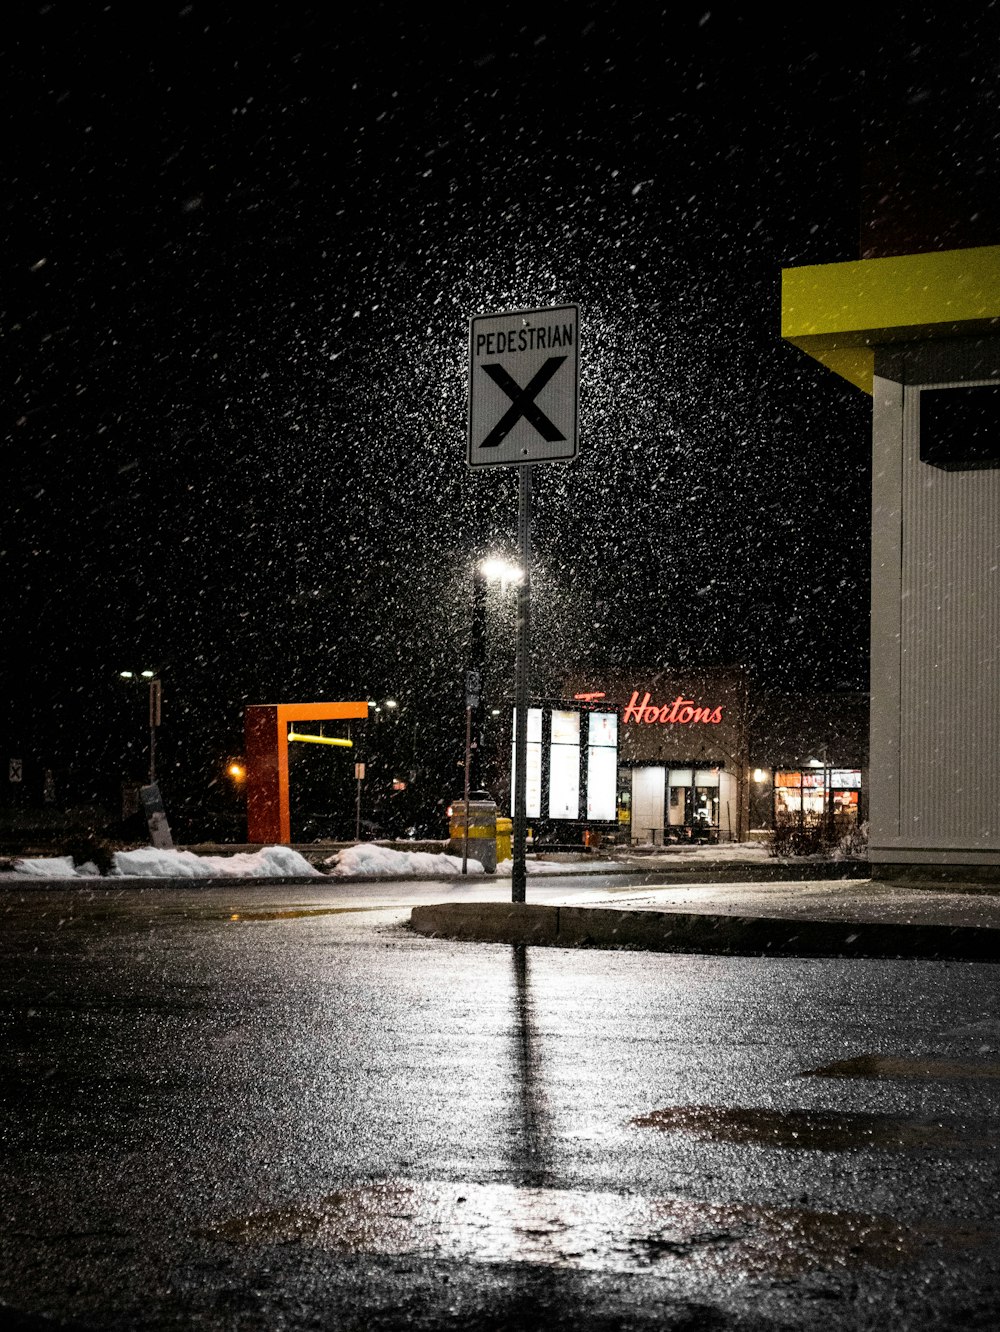 a crosswalk sign in the snow at night